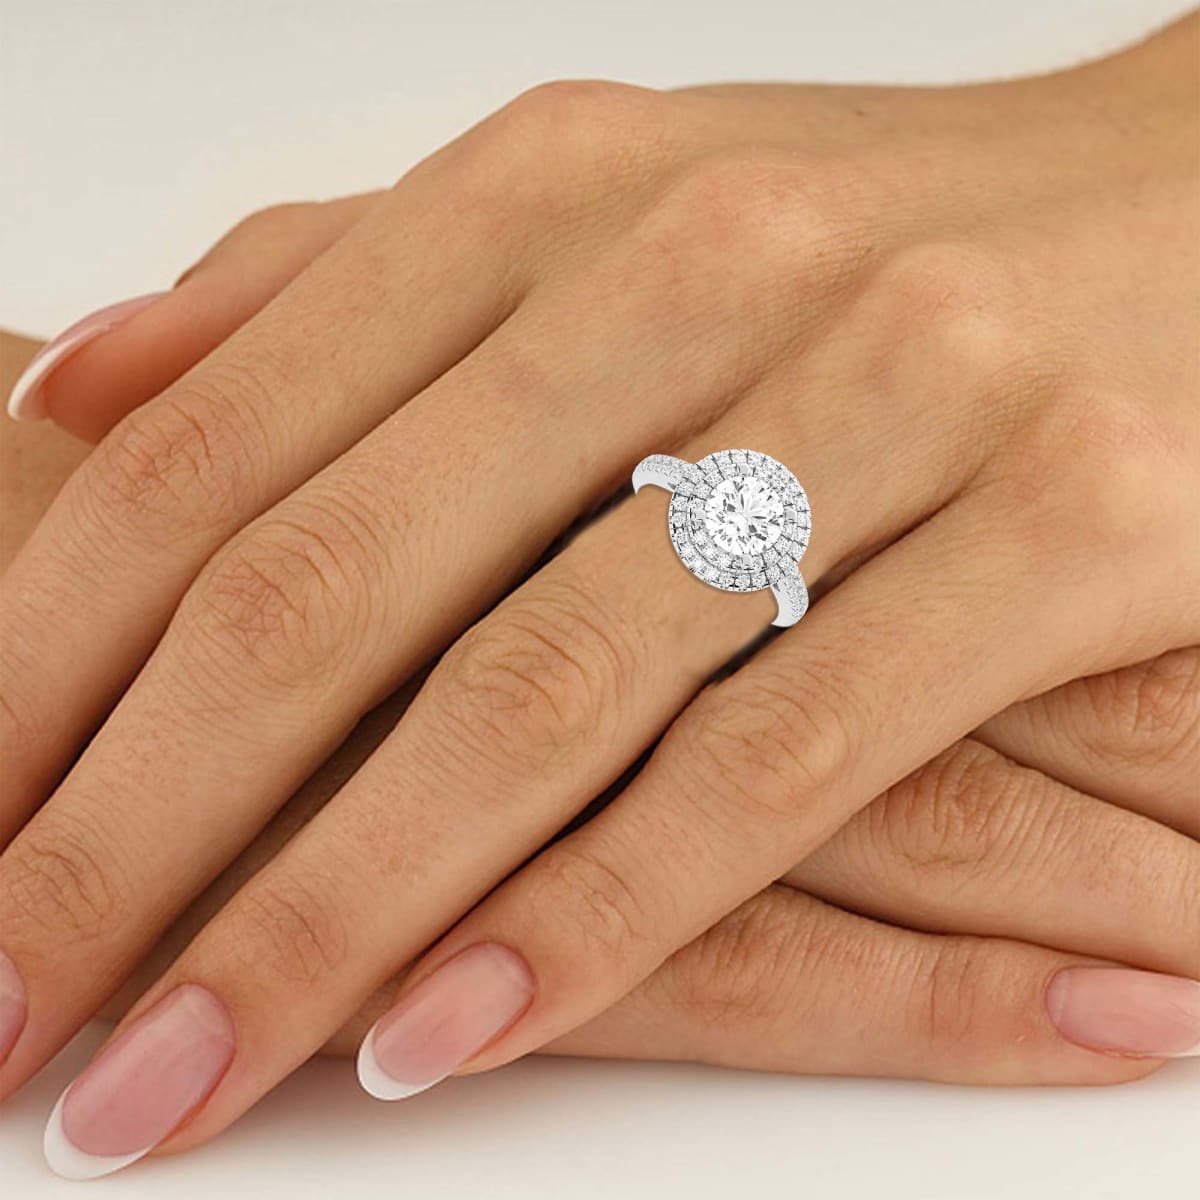 Where to purchase your diamond engagement ring from - UAE, India or Belgium?